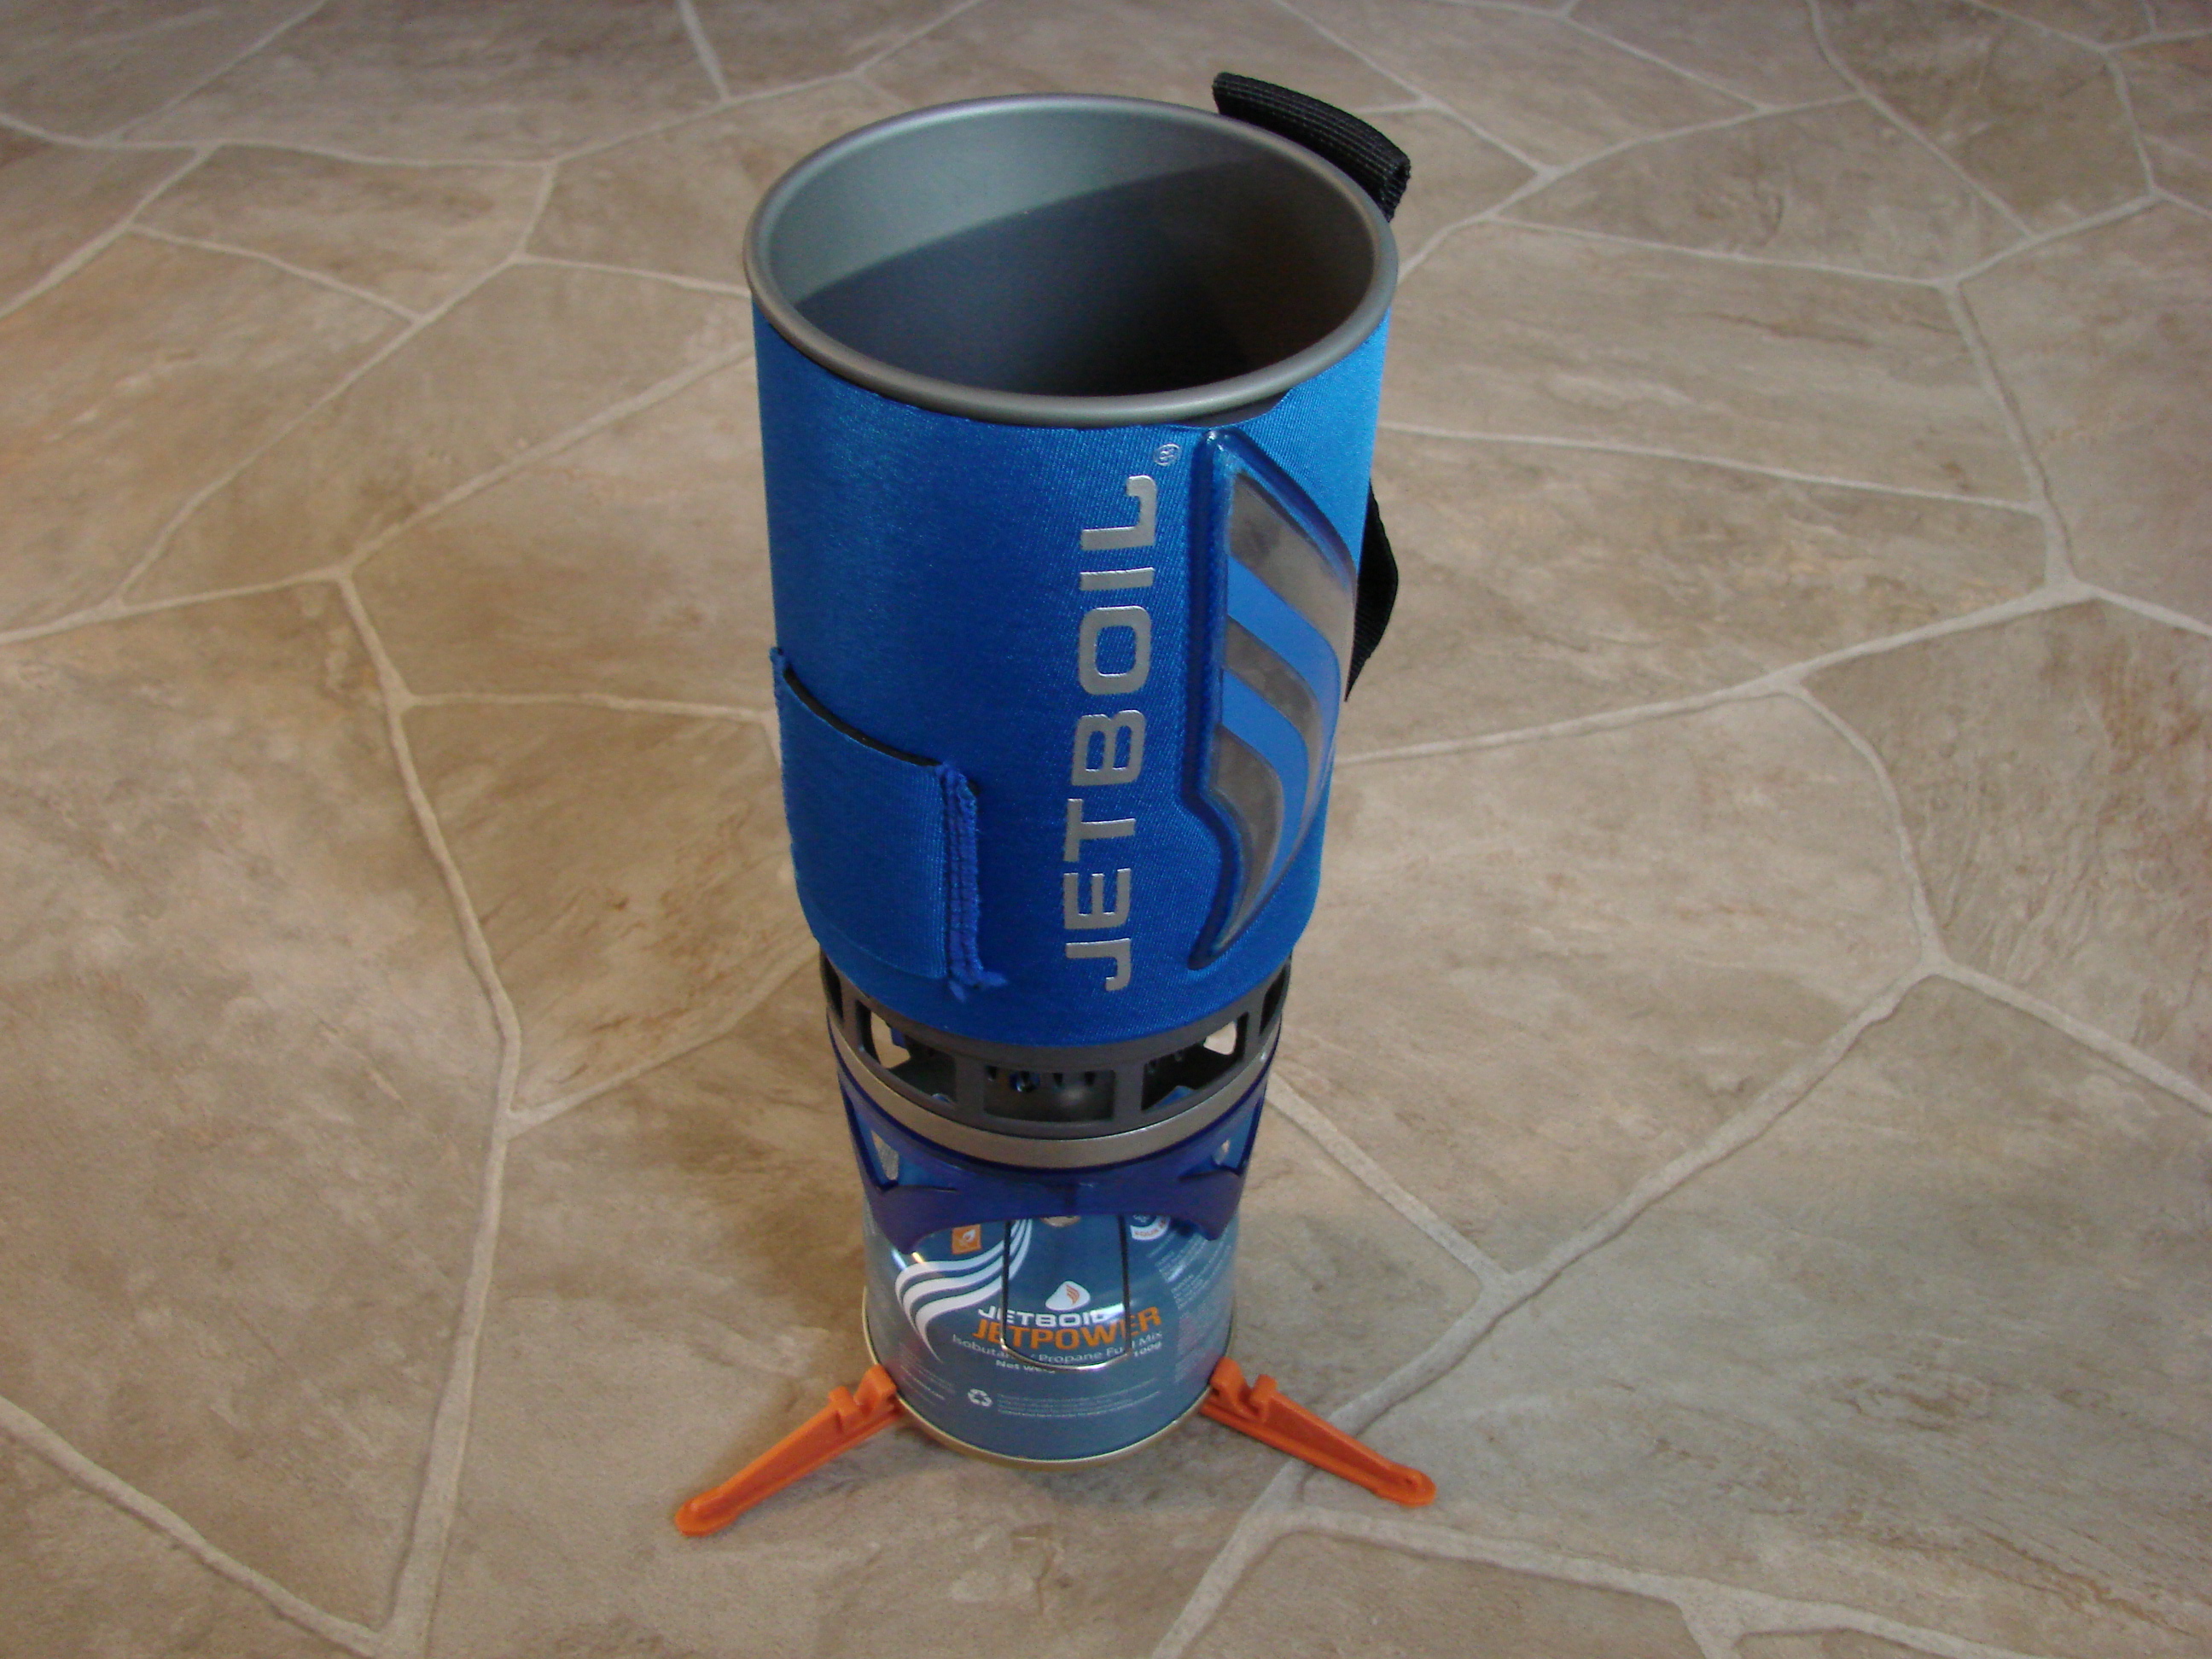 Flash by Jetboil review